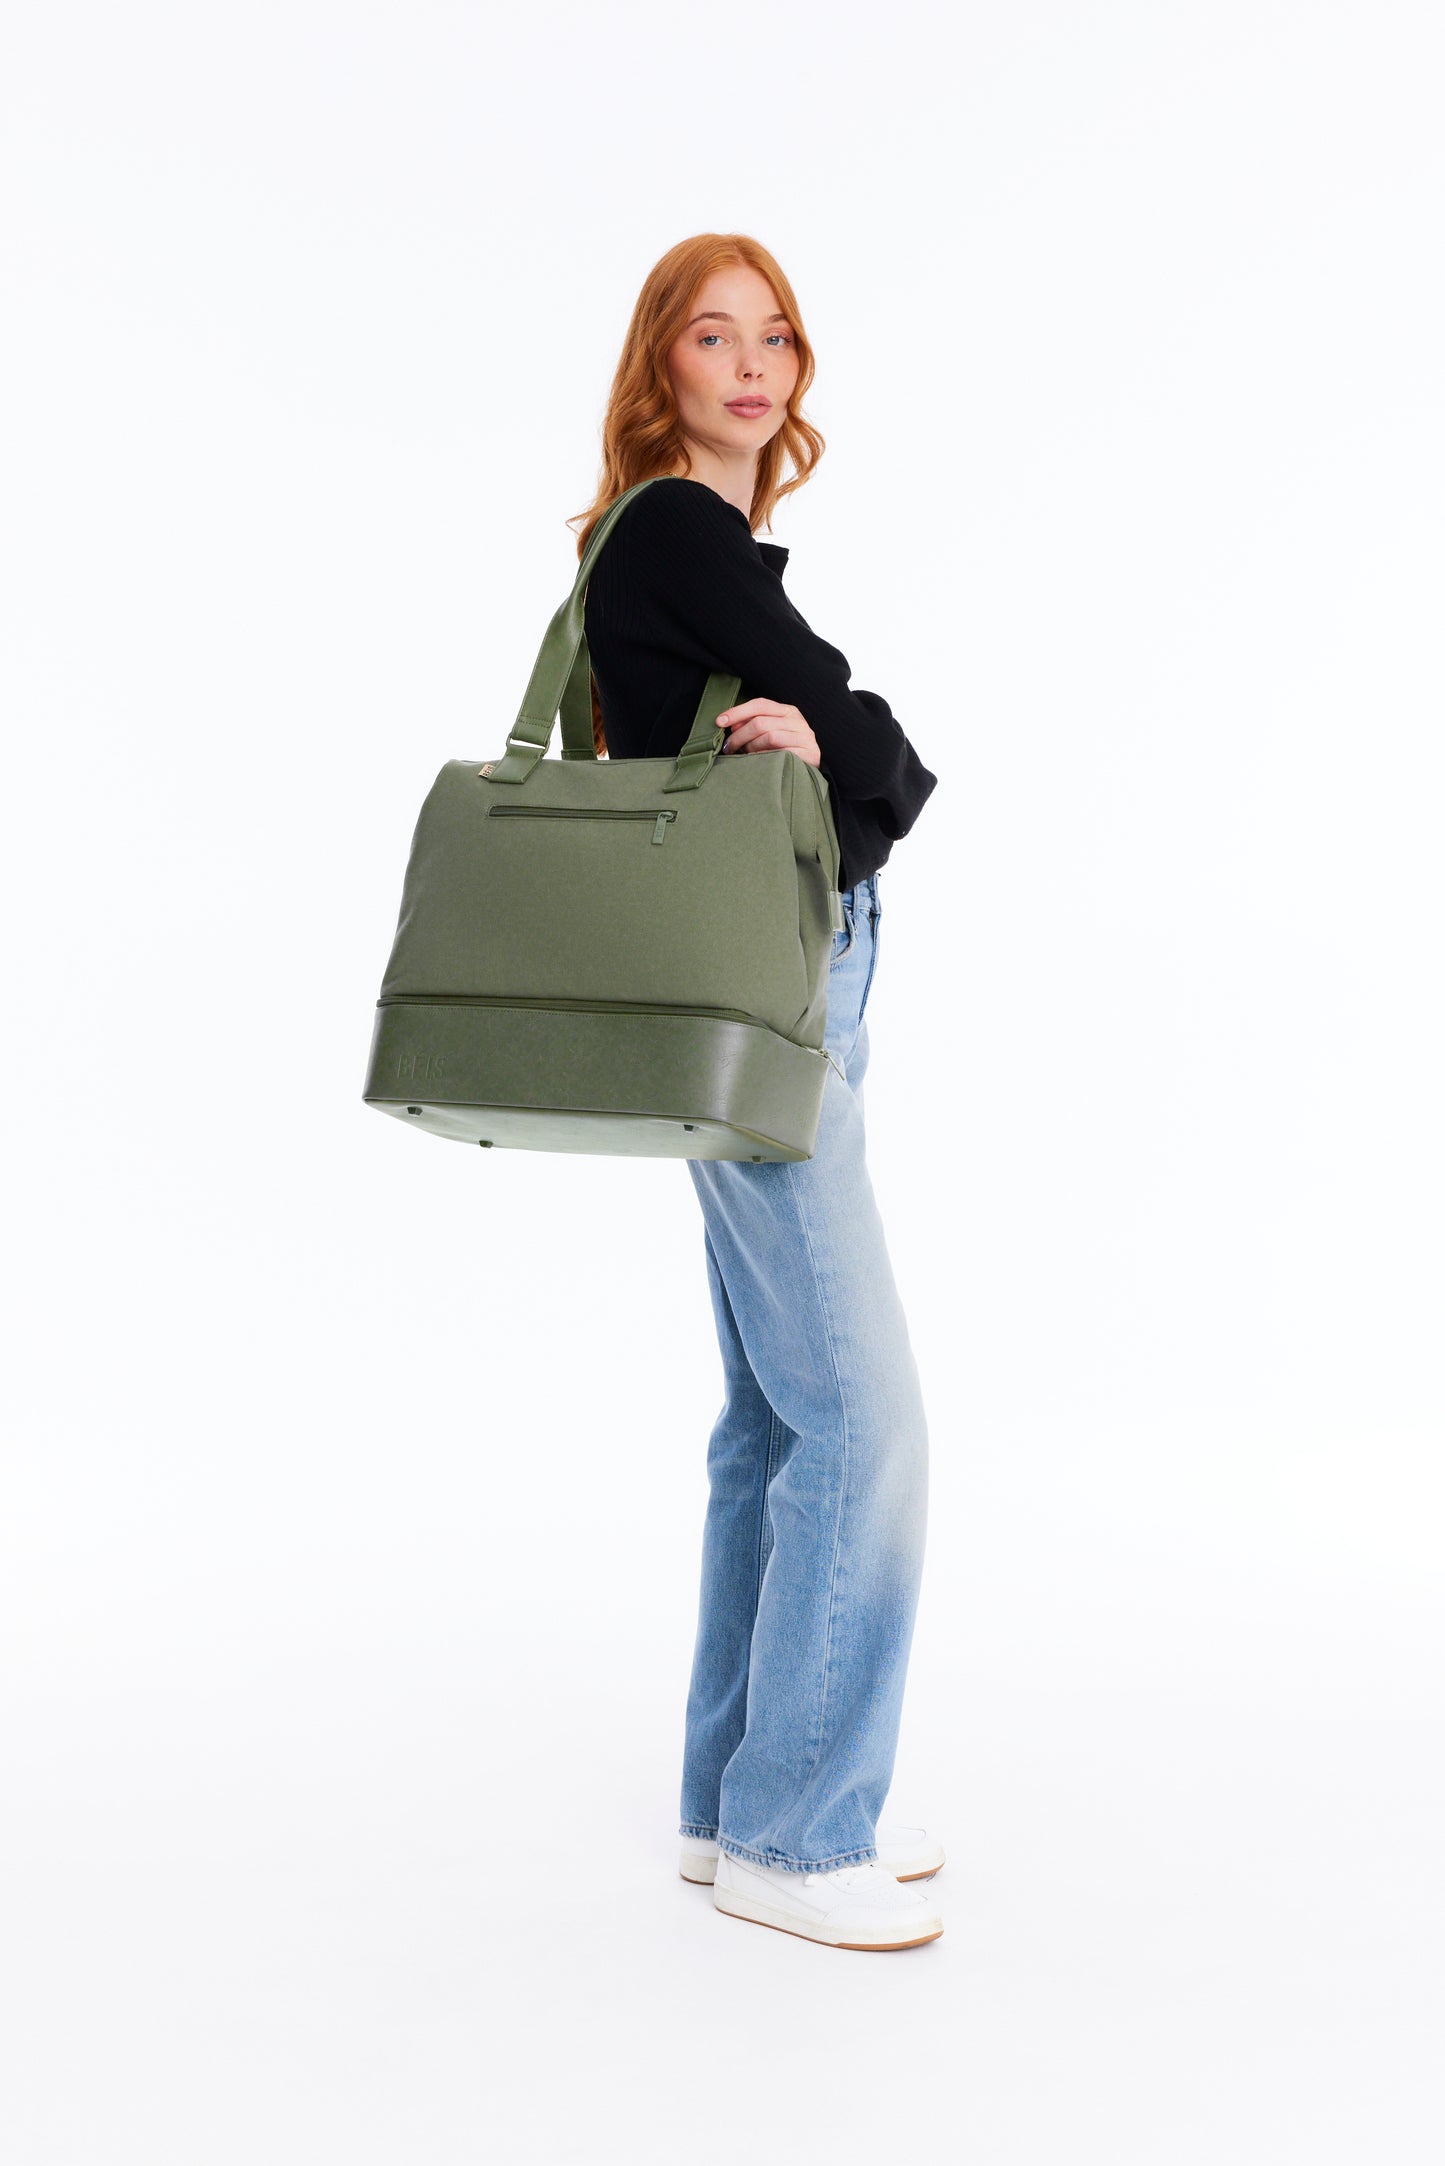 BÉIS 'The Mini Weekender' in Olive - Small Olive Green Duffle